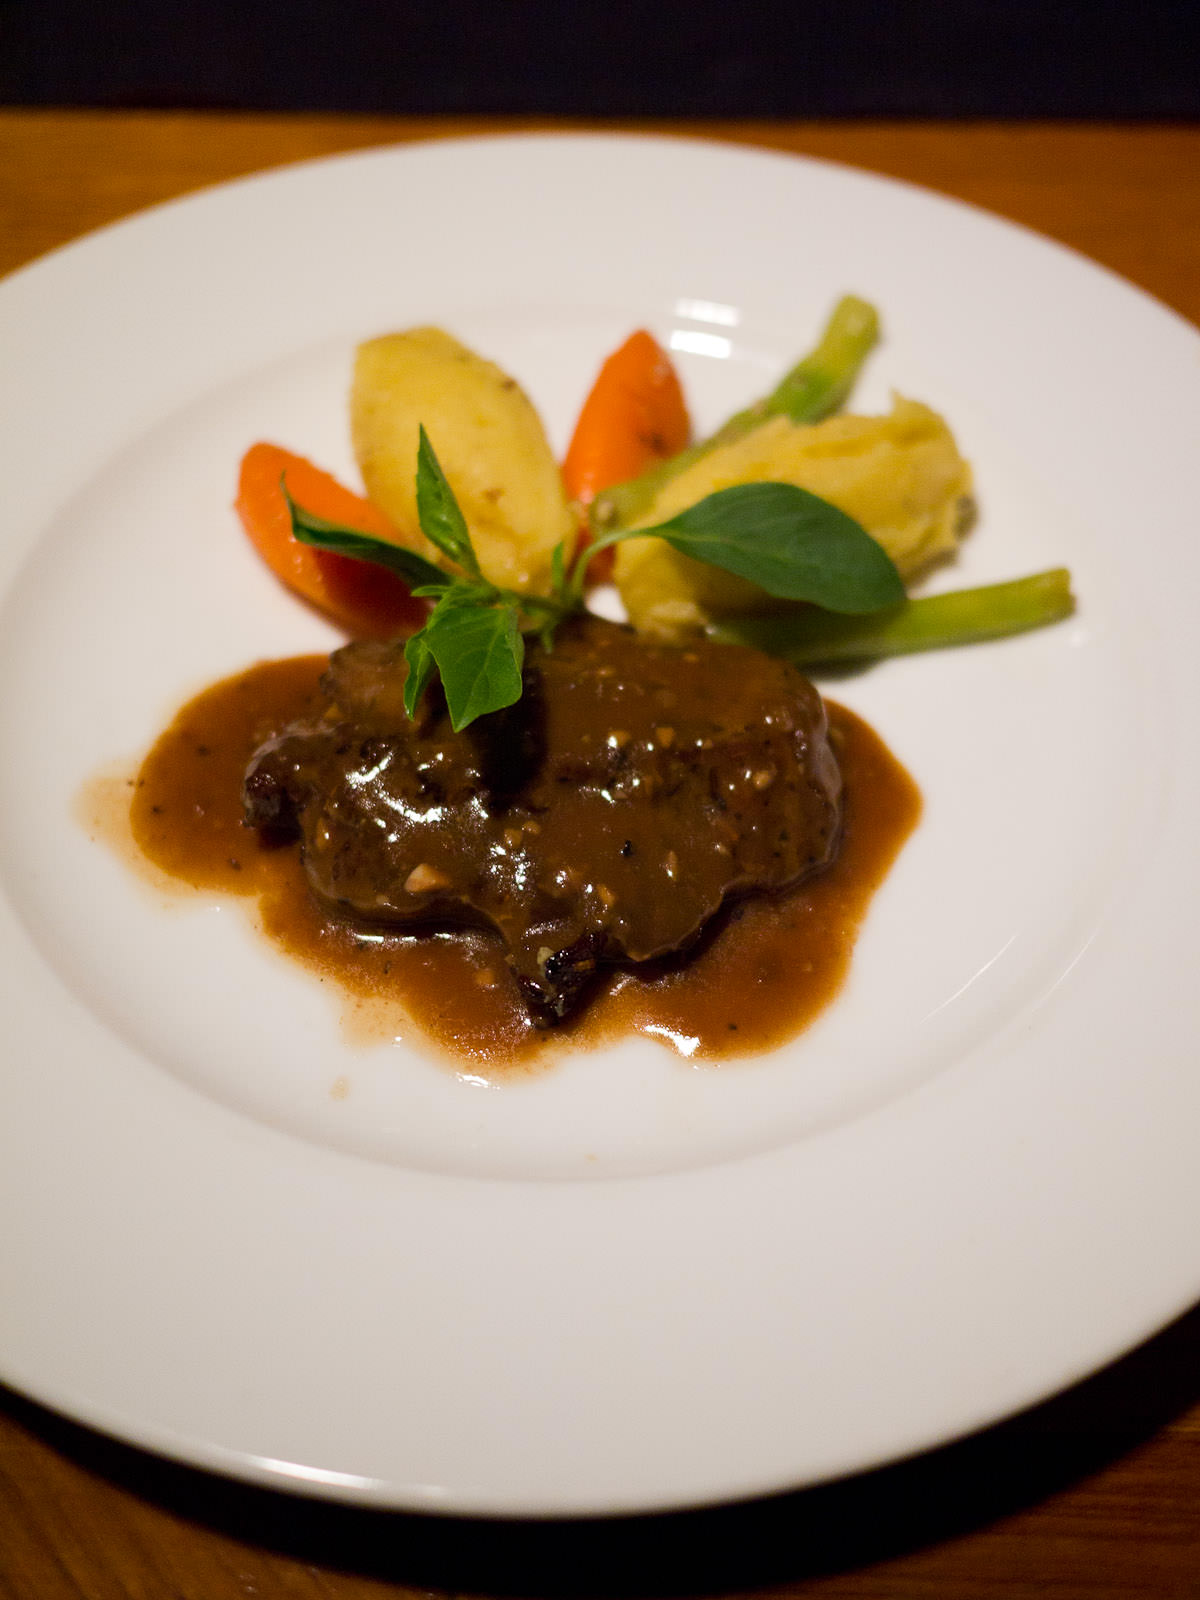 Ostrich with Kampot pepper sauce with potato mash and vegetables